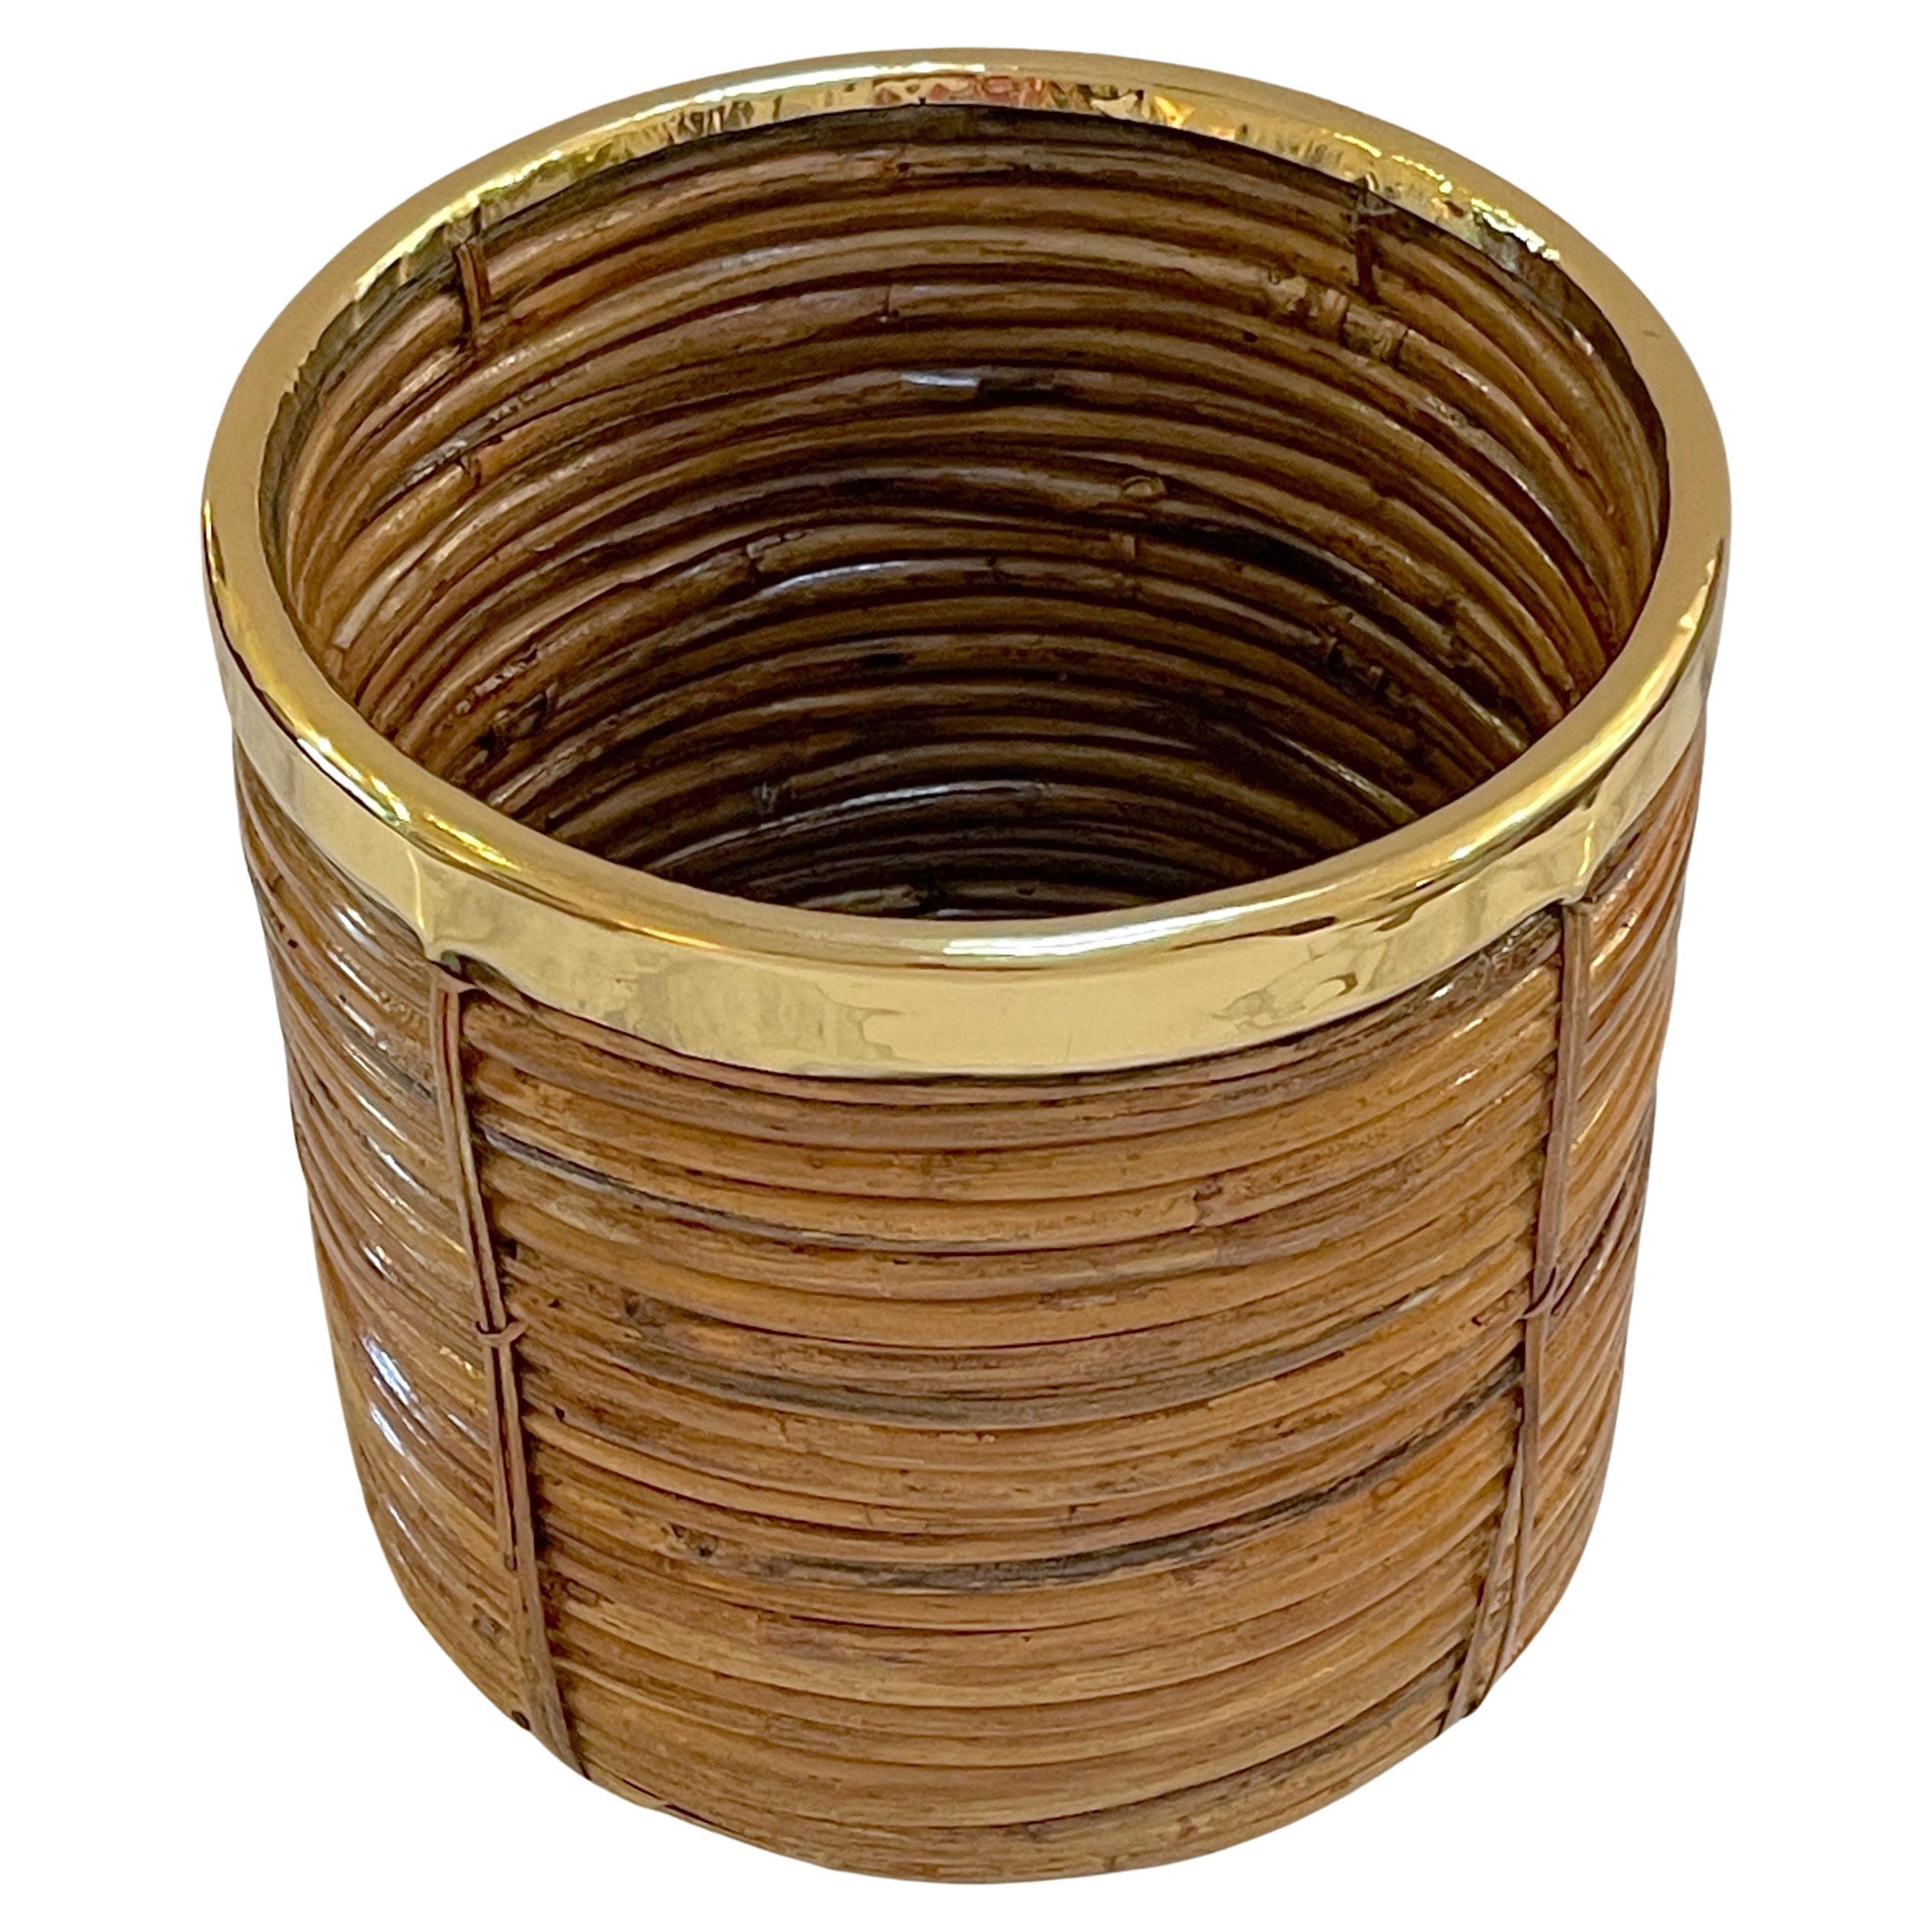 1970s Italian Bamboo/ Rattan Wastepaper Basket with Polished Brass Rim For Sale